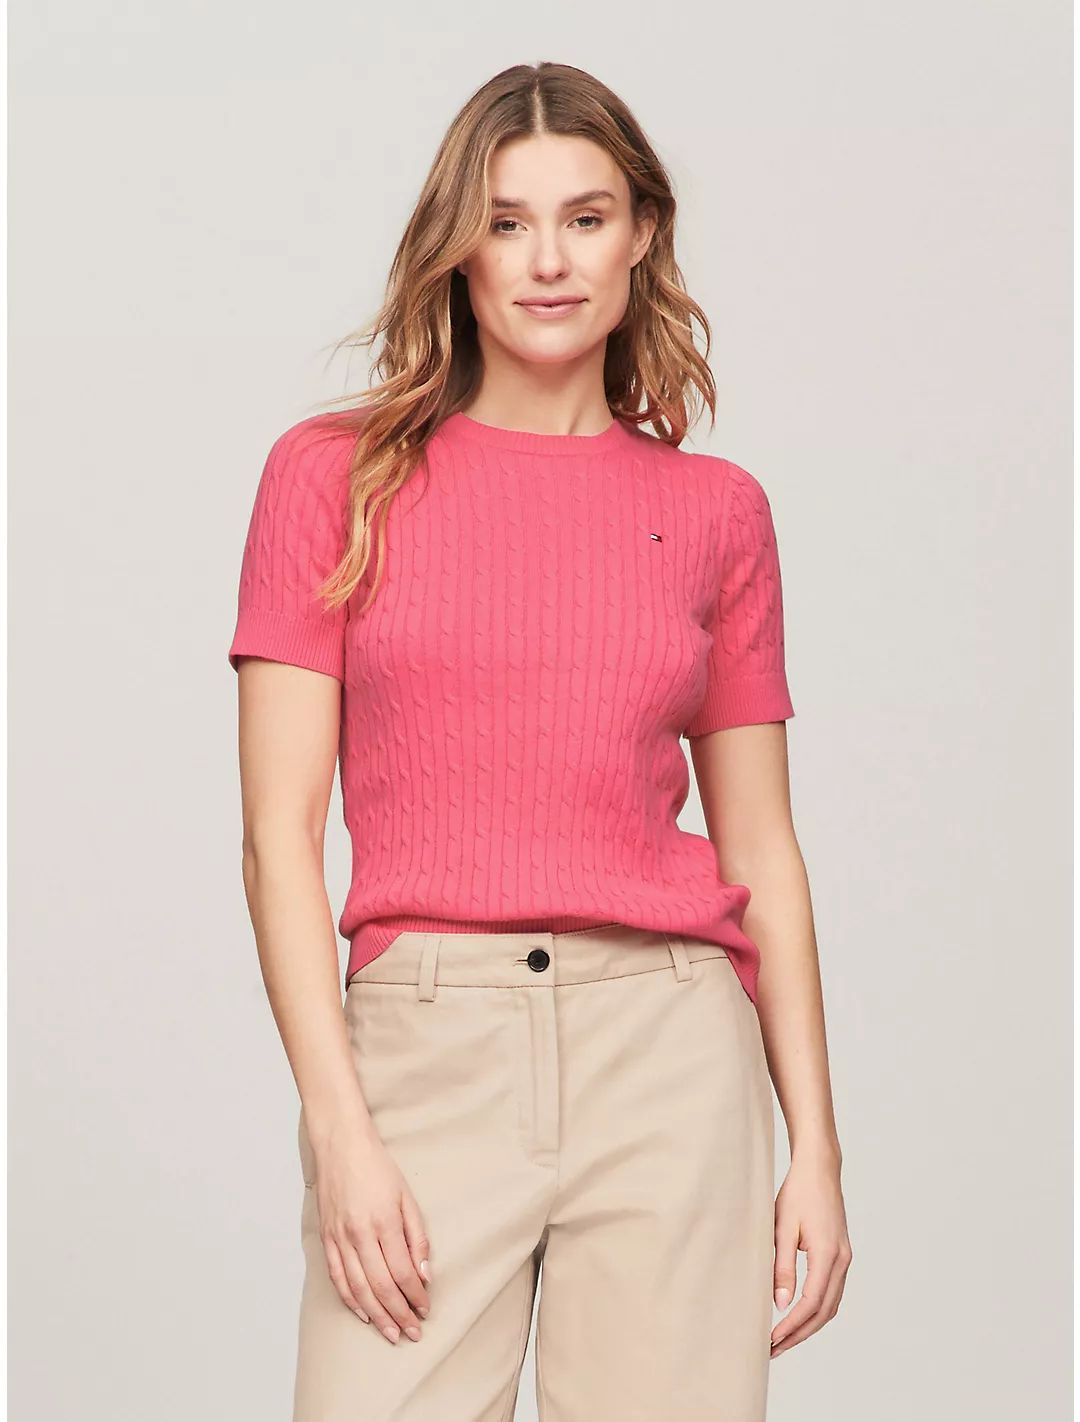 Short-Sleeve Cable Knit Sweater | Tommy Hilfiger | Tommy Hilfiger (US)